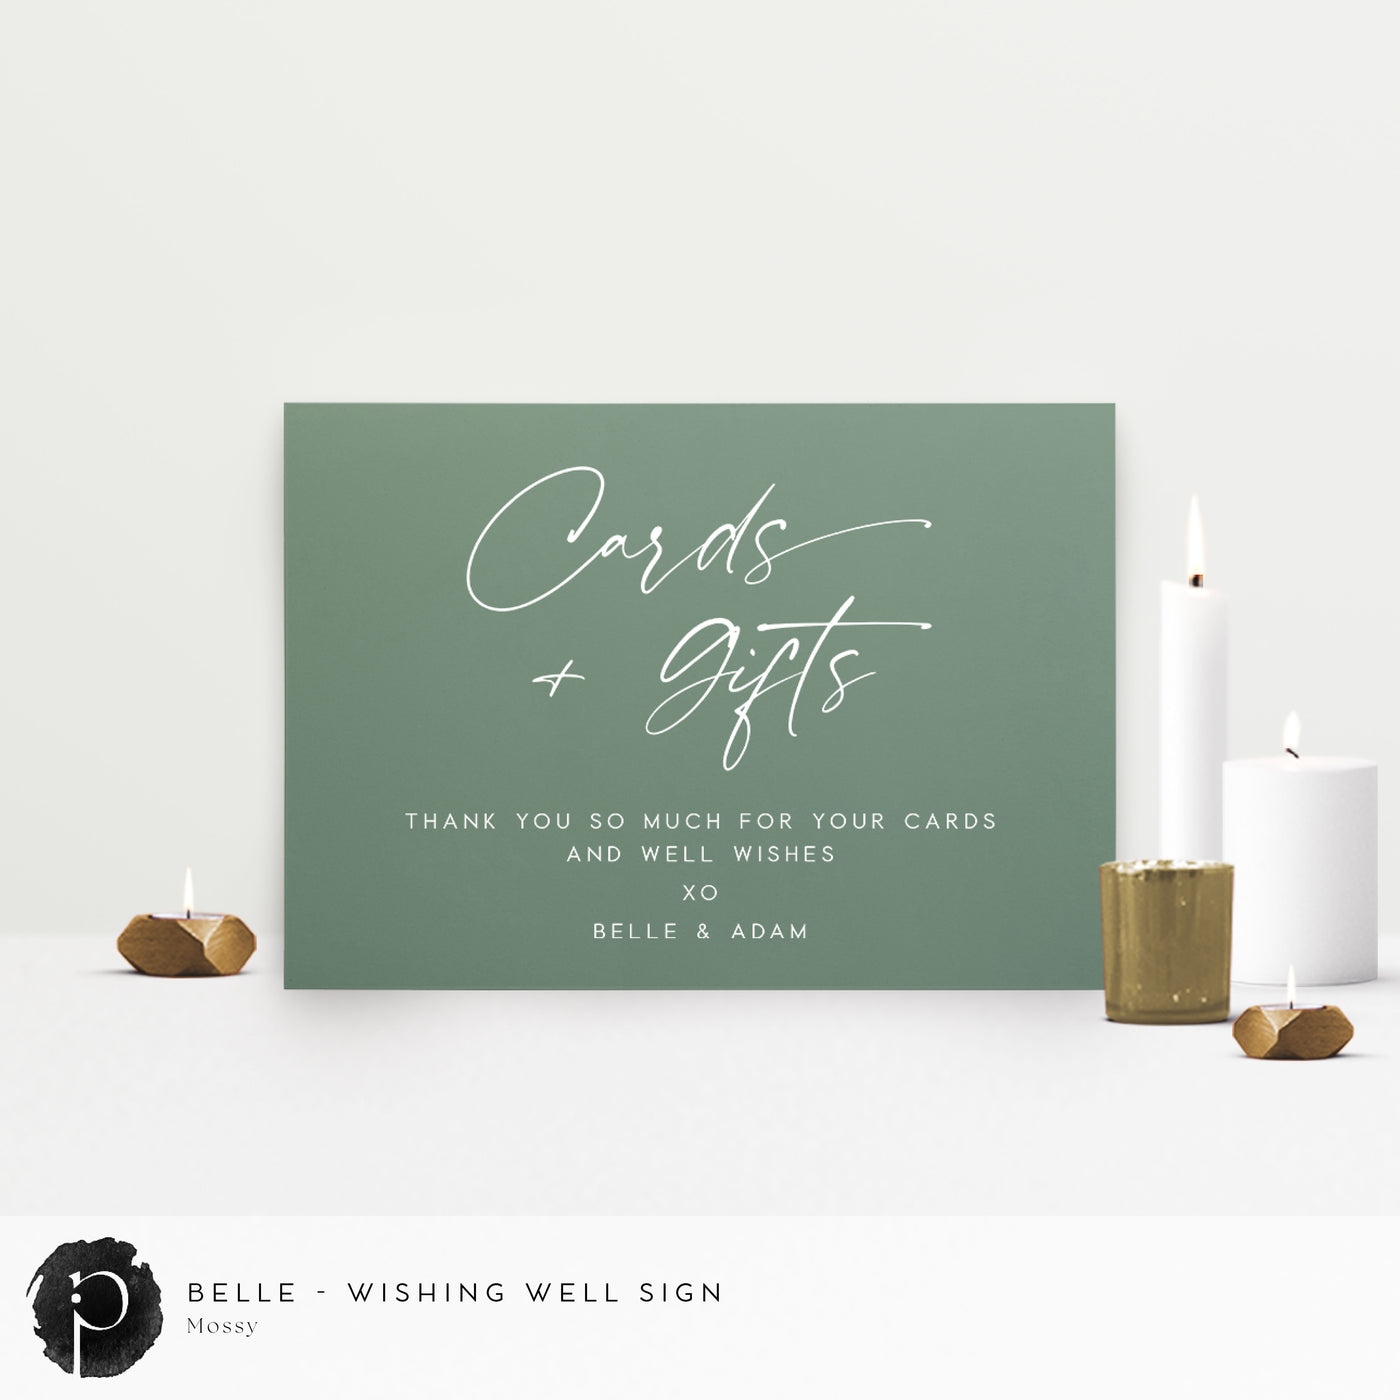 Belle - Cards/Gifts/Presents/Wishing Well Table Sign